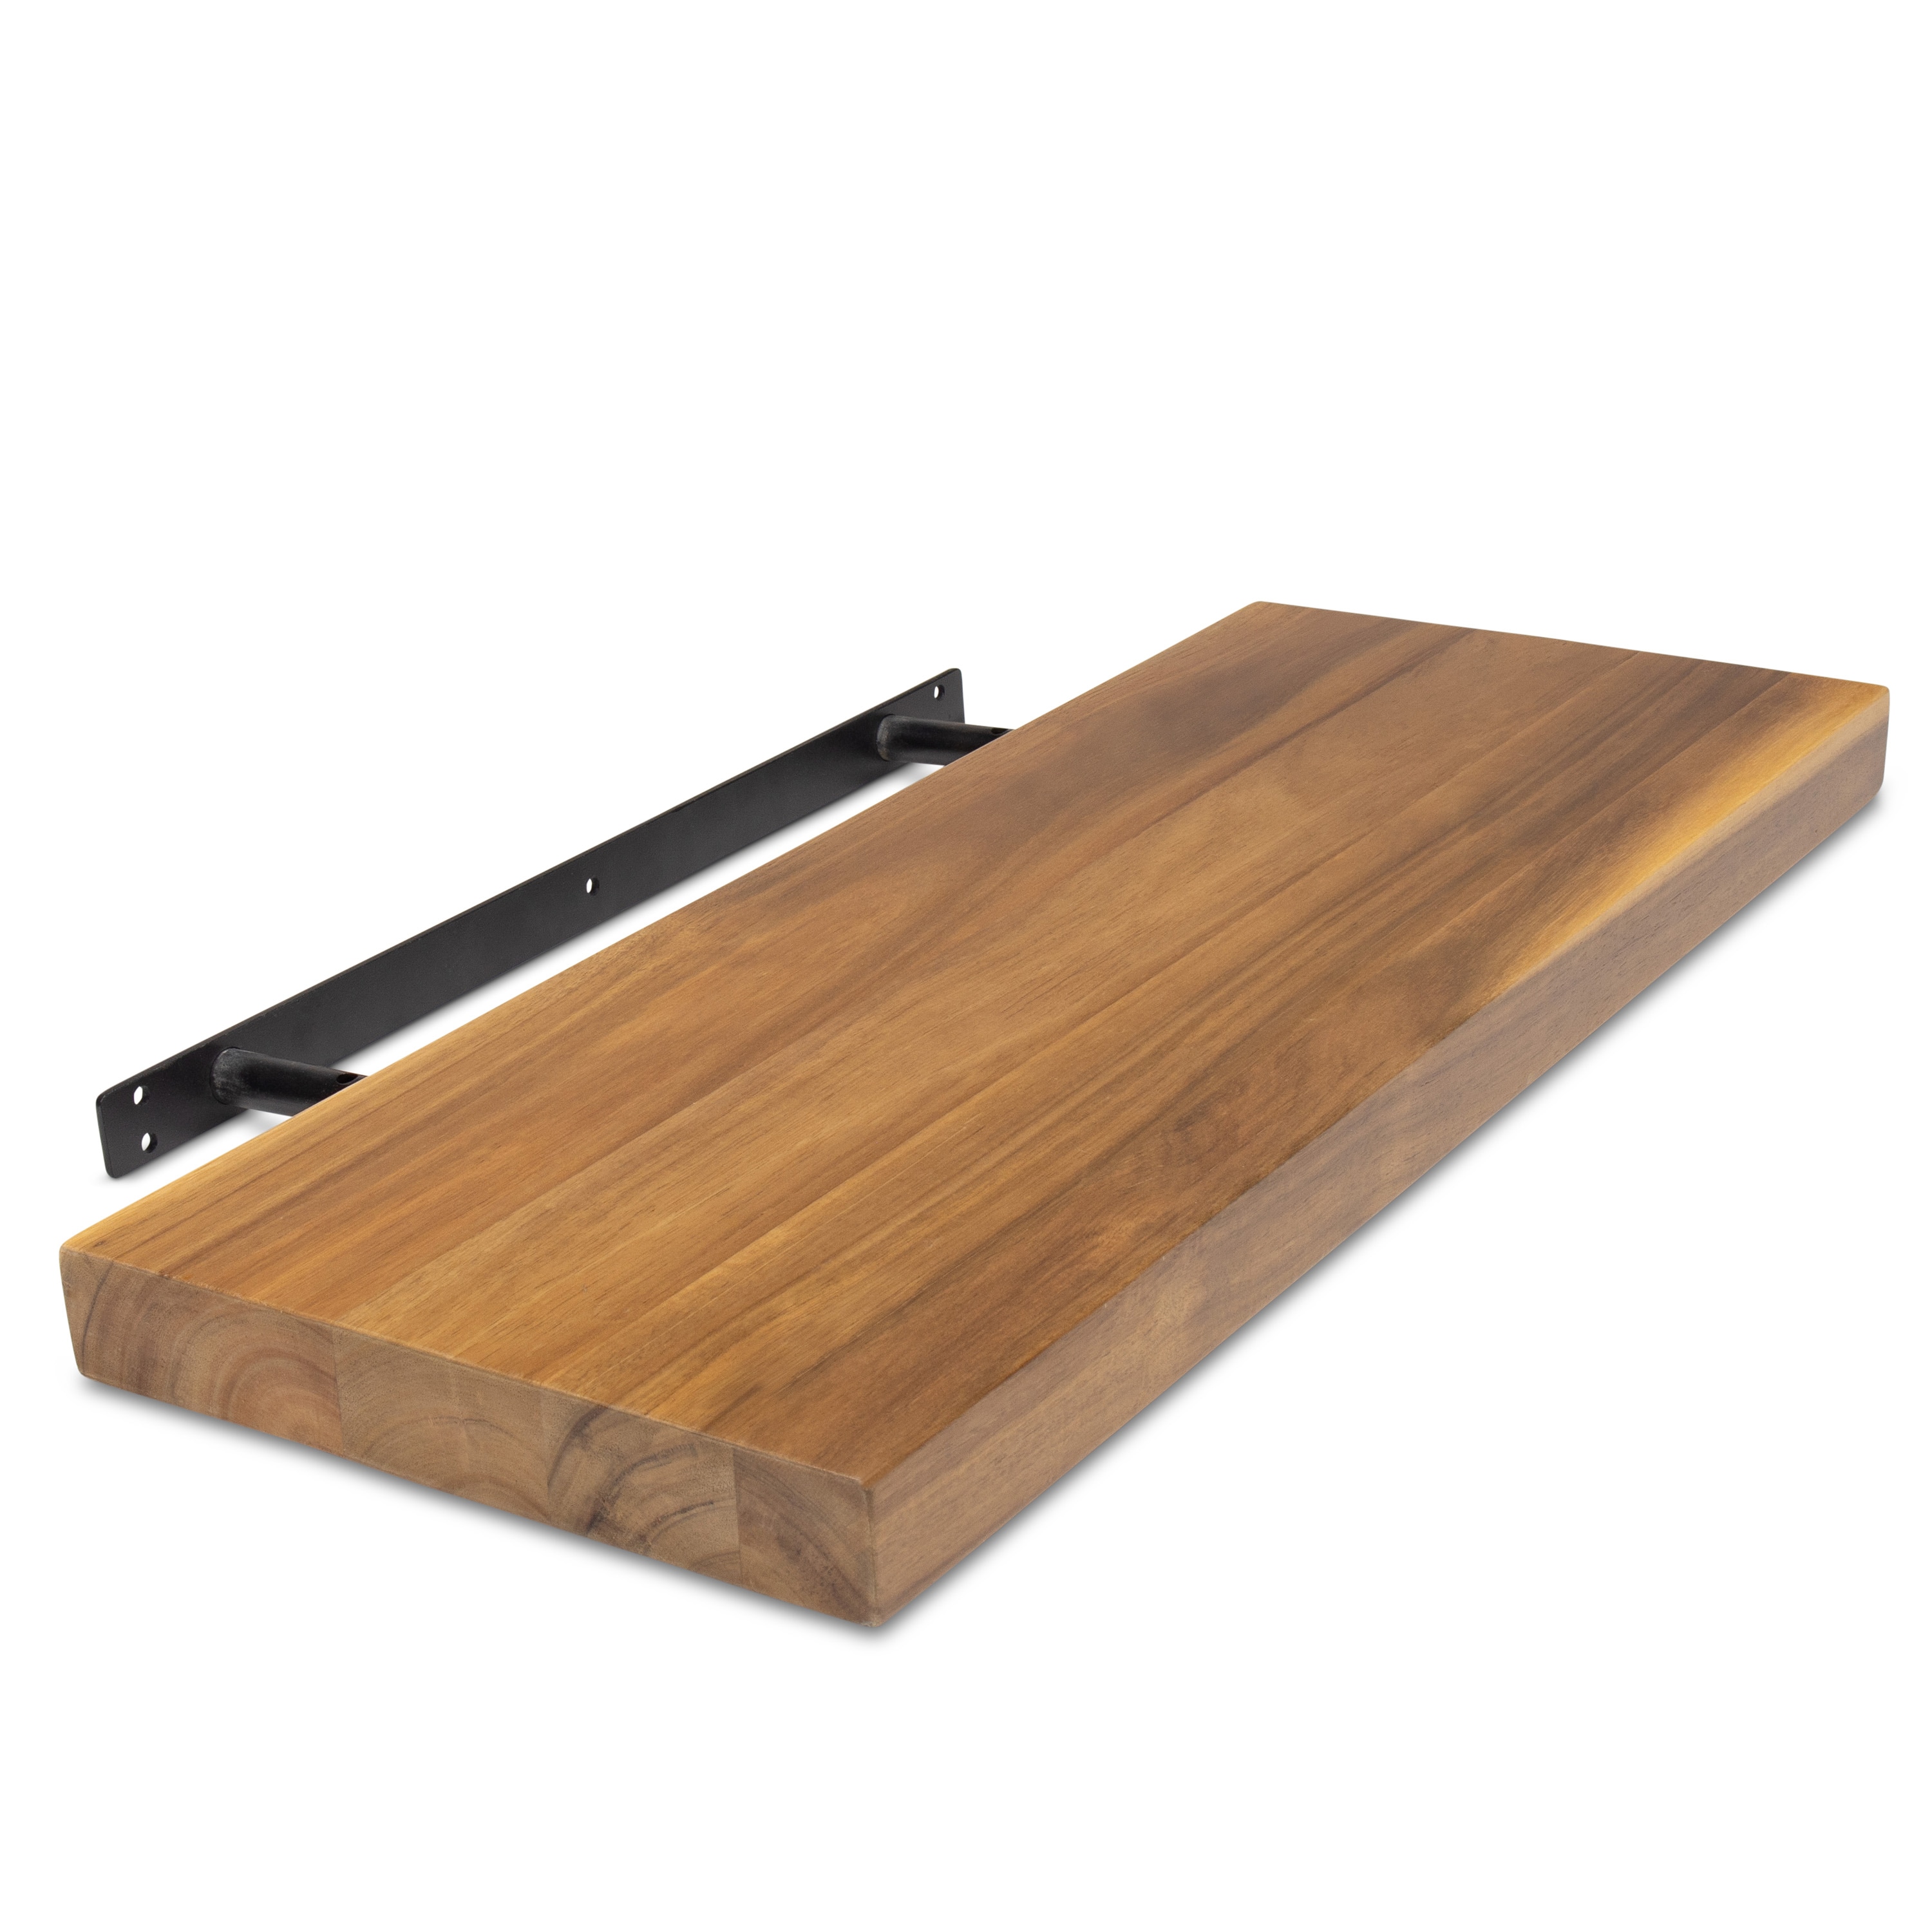 Buy Hand Crafted 3 Drawer Floating Shelf, Solid Wood, Inset Teak Drawer  Pulls, made to order from Nick Jones Designs